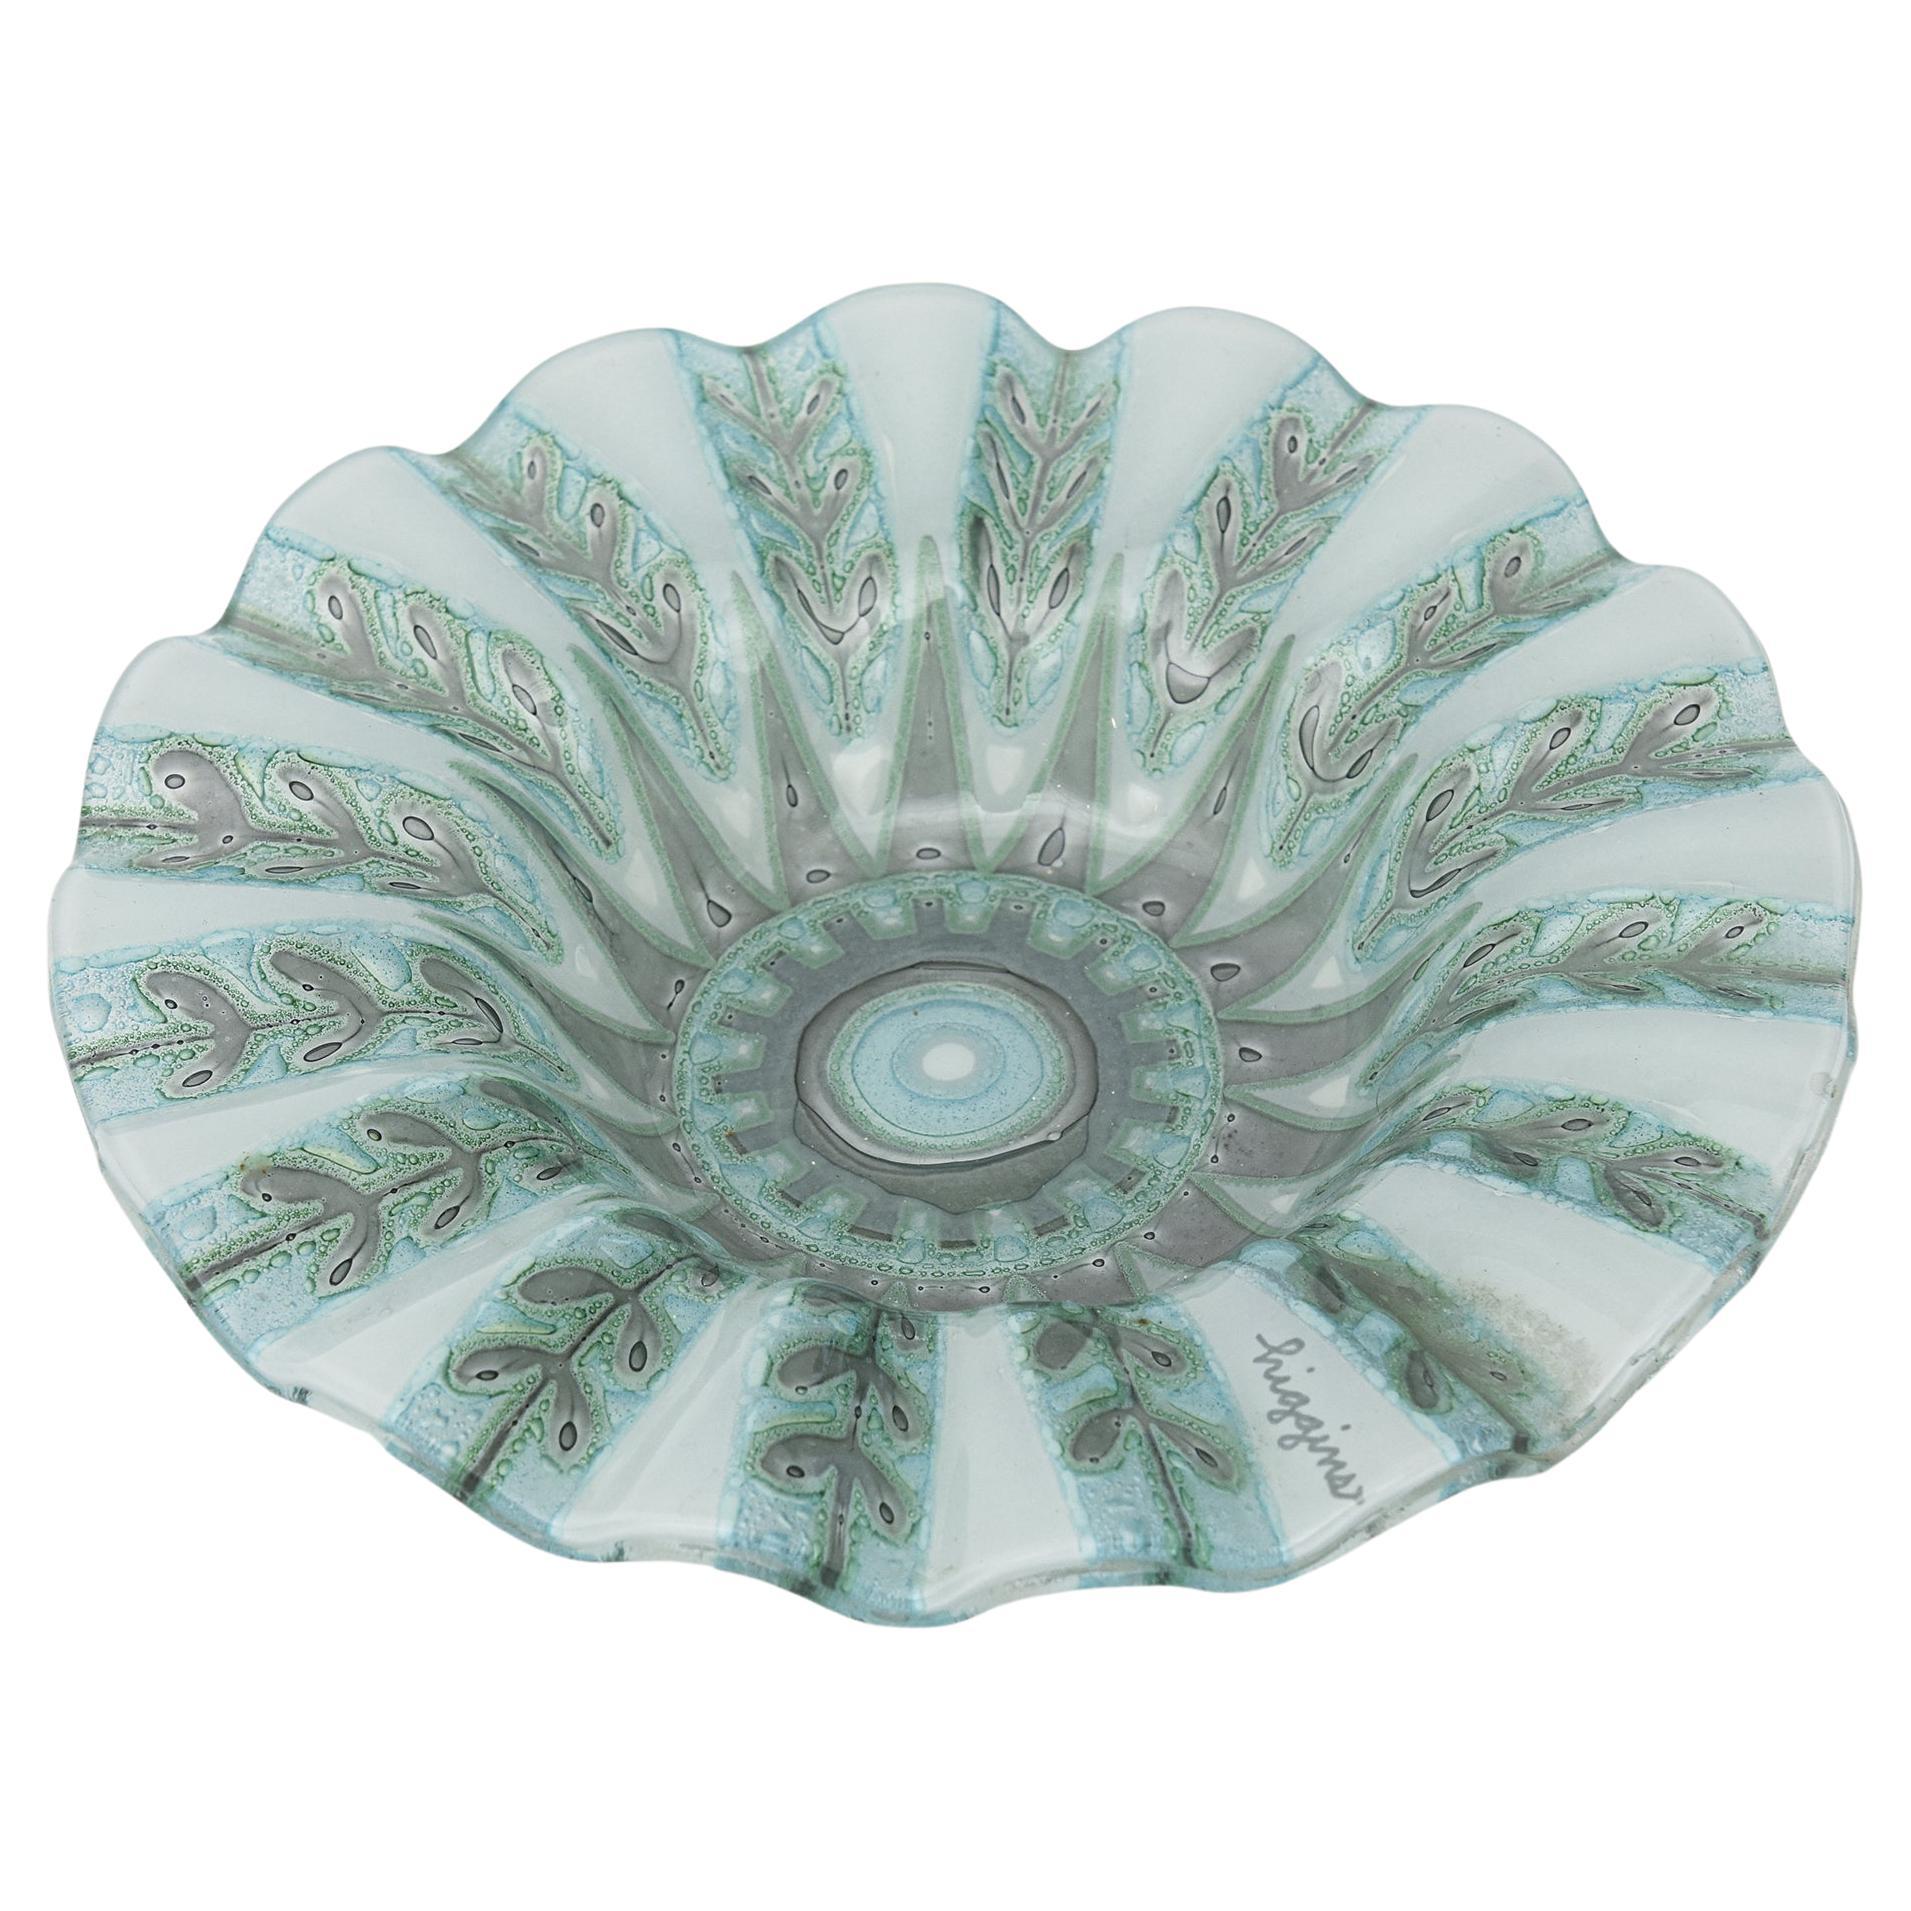 Vintage Signed Higgins Fused Glass Fern Ruffled Bowl Green, Blue, Gray Silver For Sale